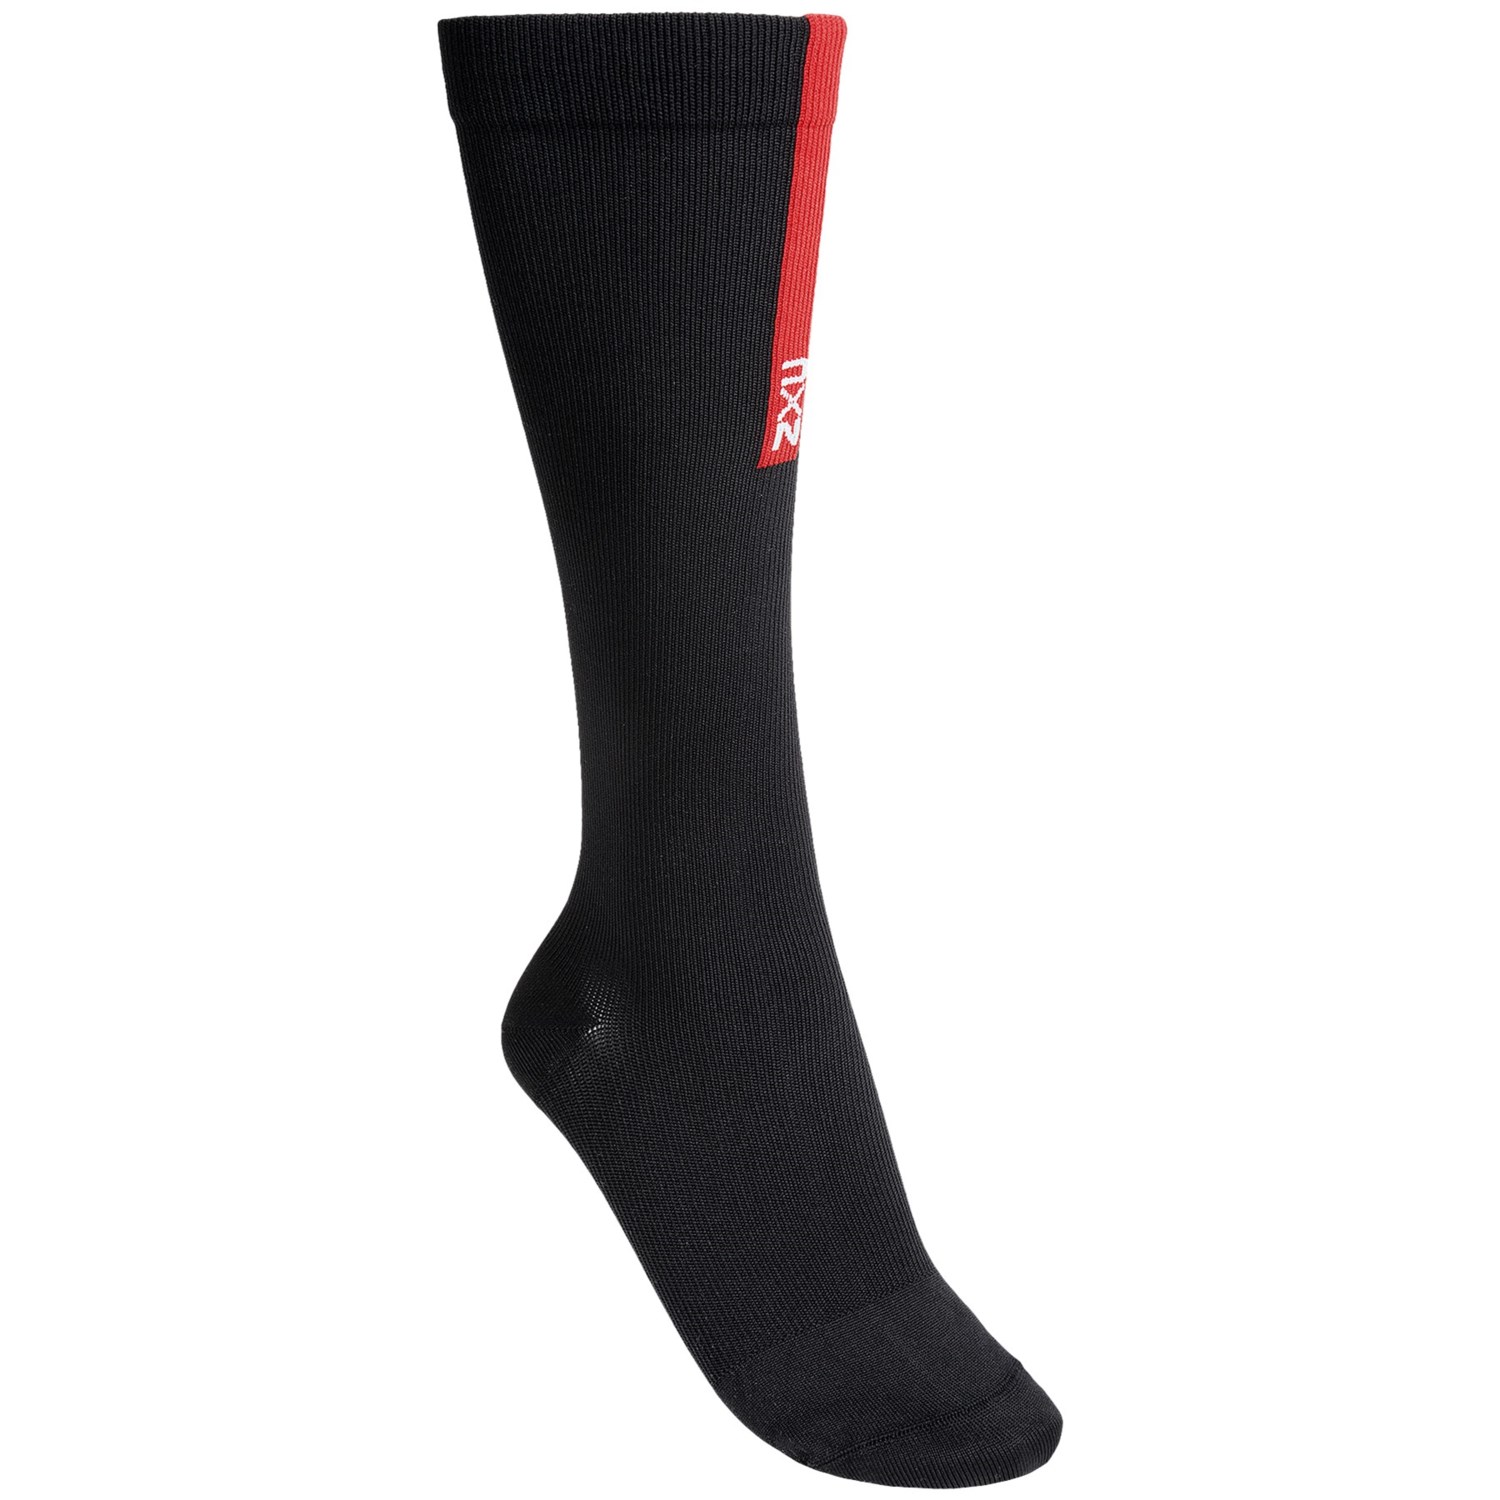 2XU Compression Recovery Socks (For Women) - Save 29%